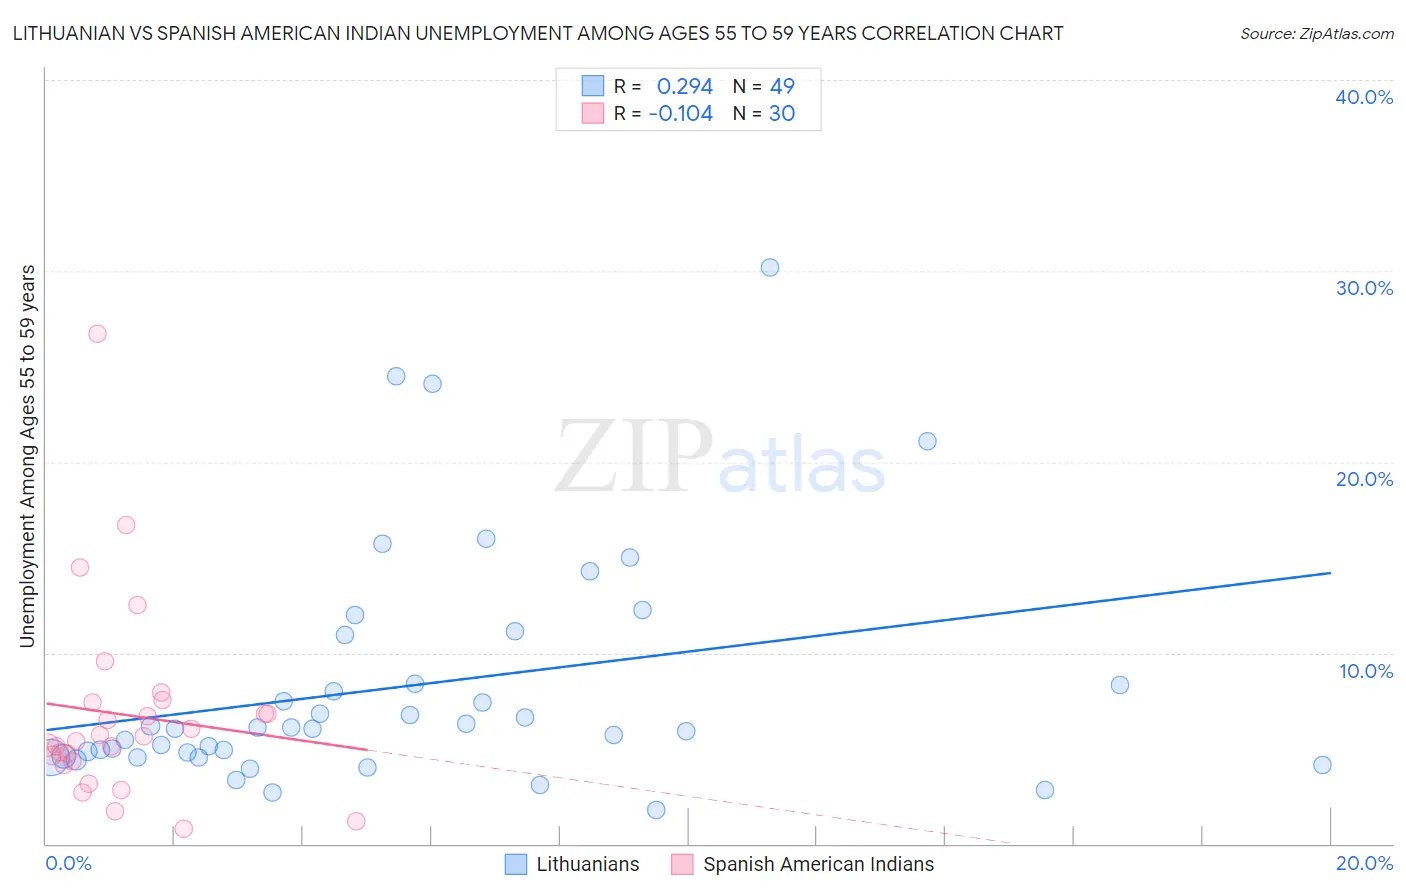 Lithuanian vs Spanish American Indian Unemployment Among Ages 55 to 59 years